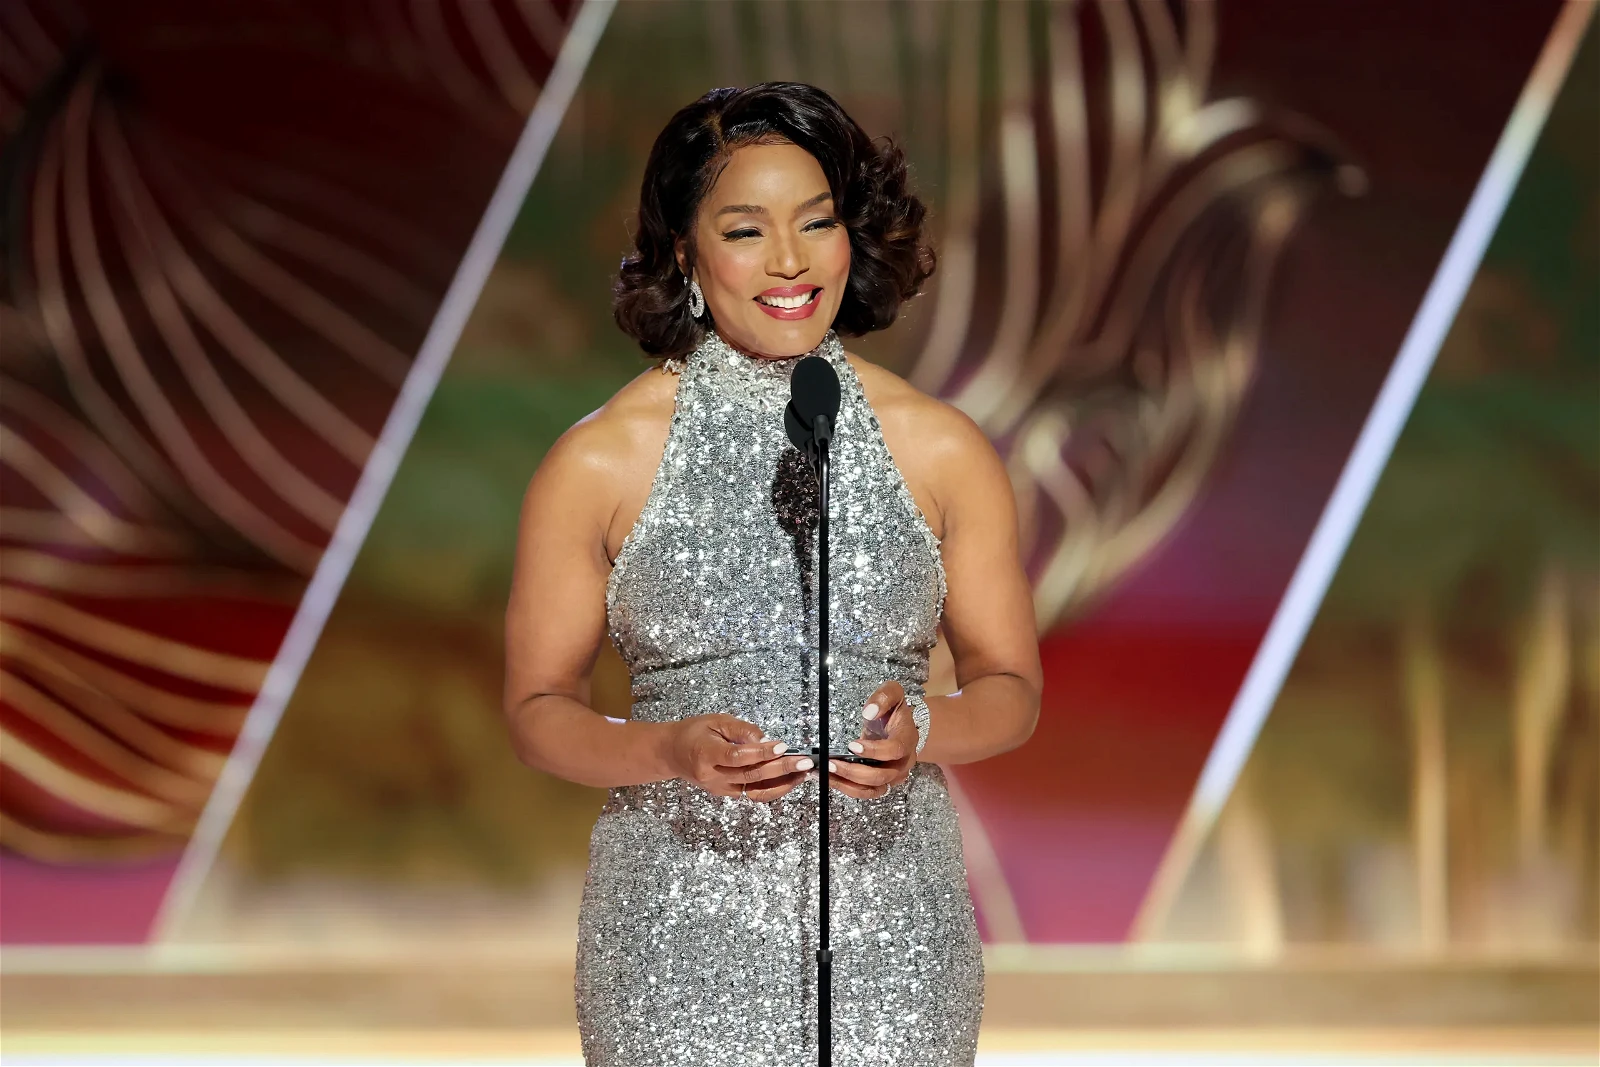 Angela Bassett got nominated twice for Oscars in her 30-year-old career